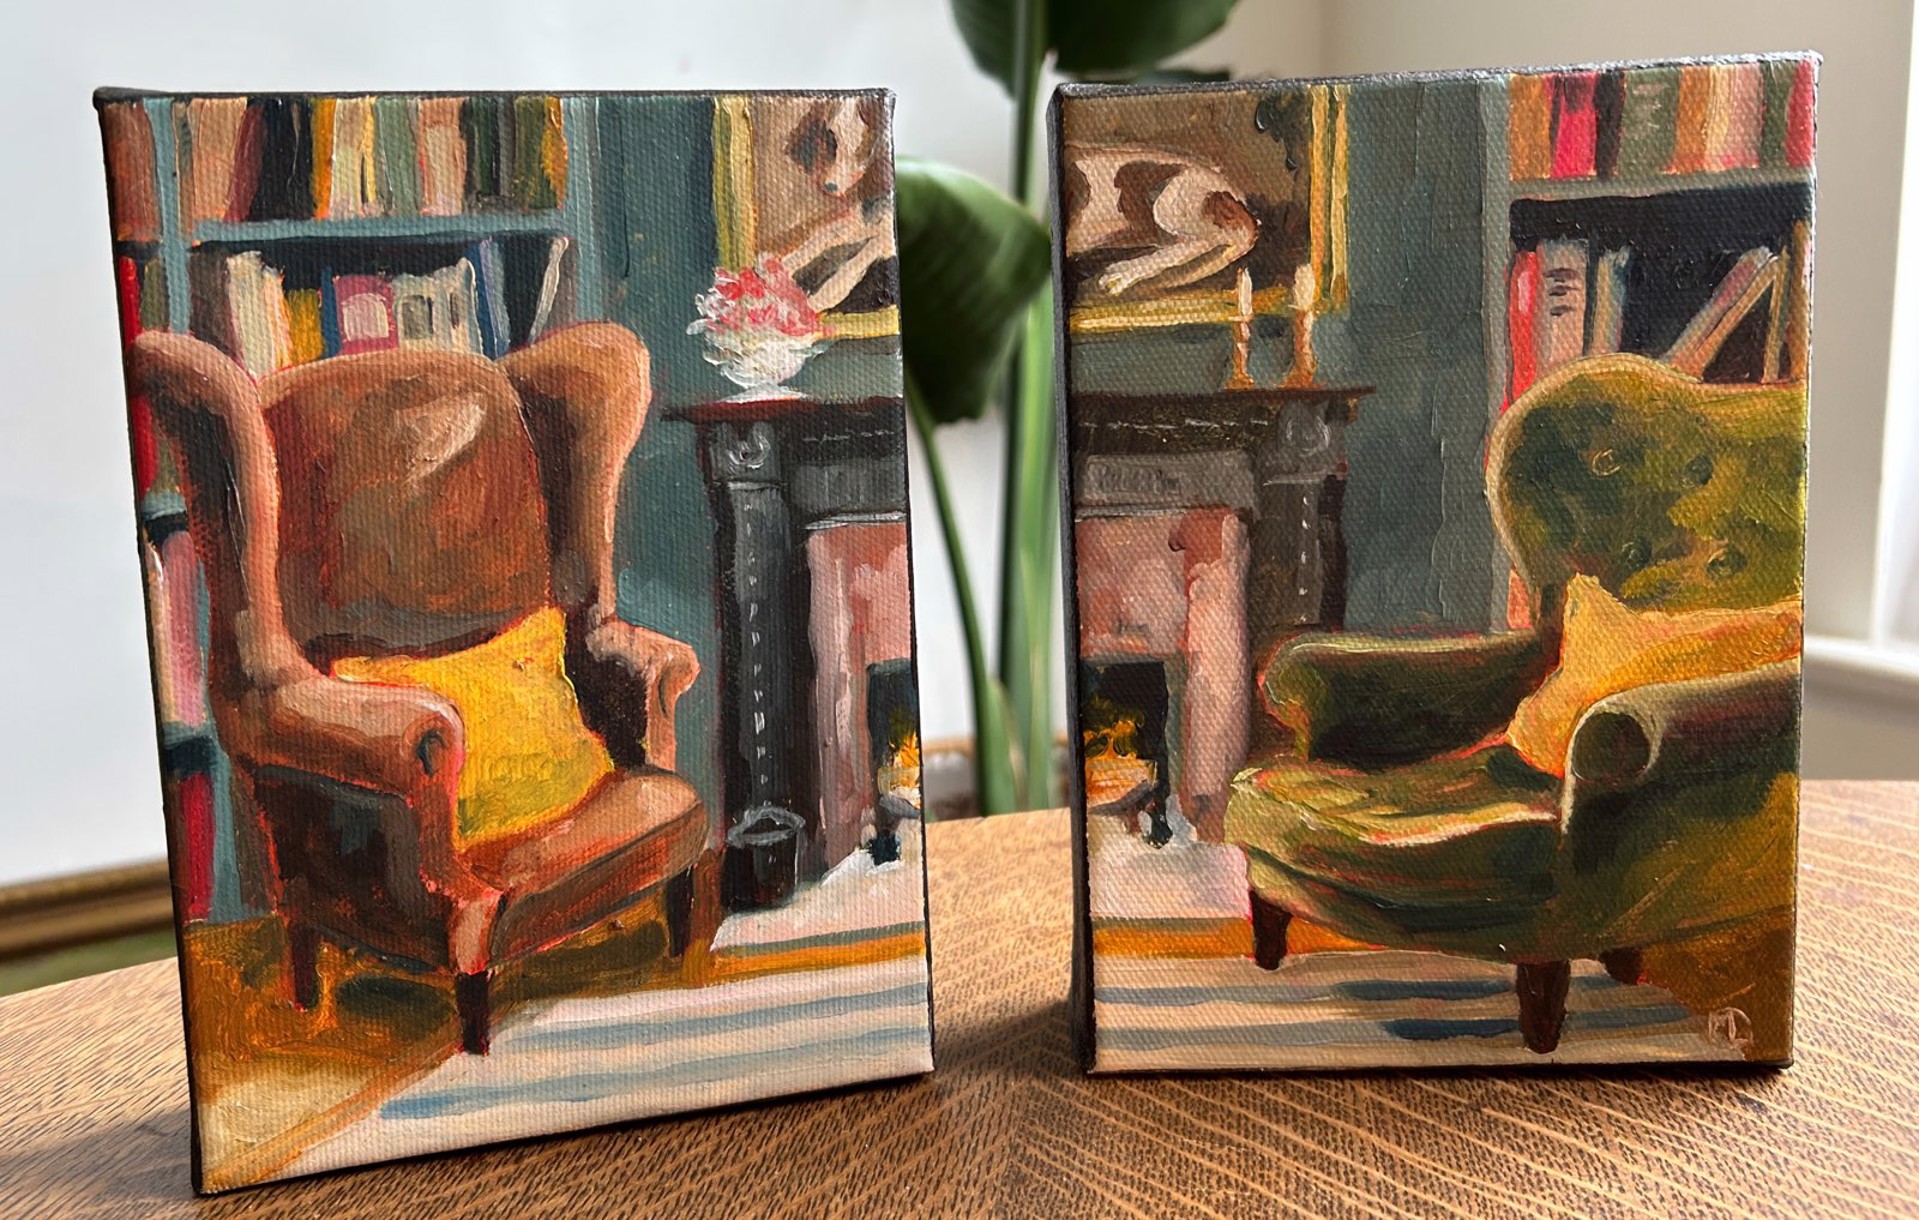 His and Hers Diptych by Mary Lekoshere